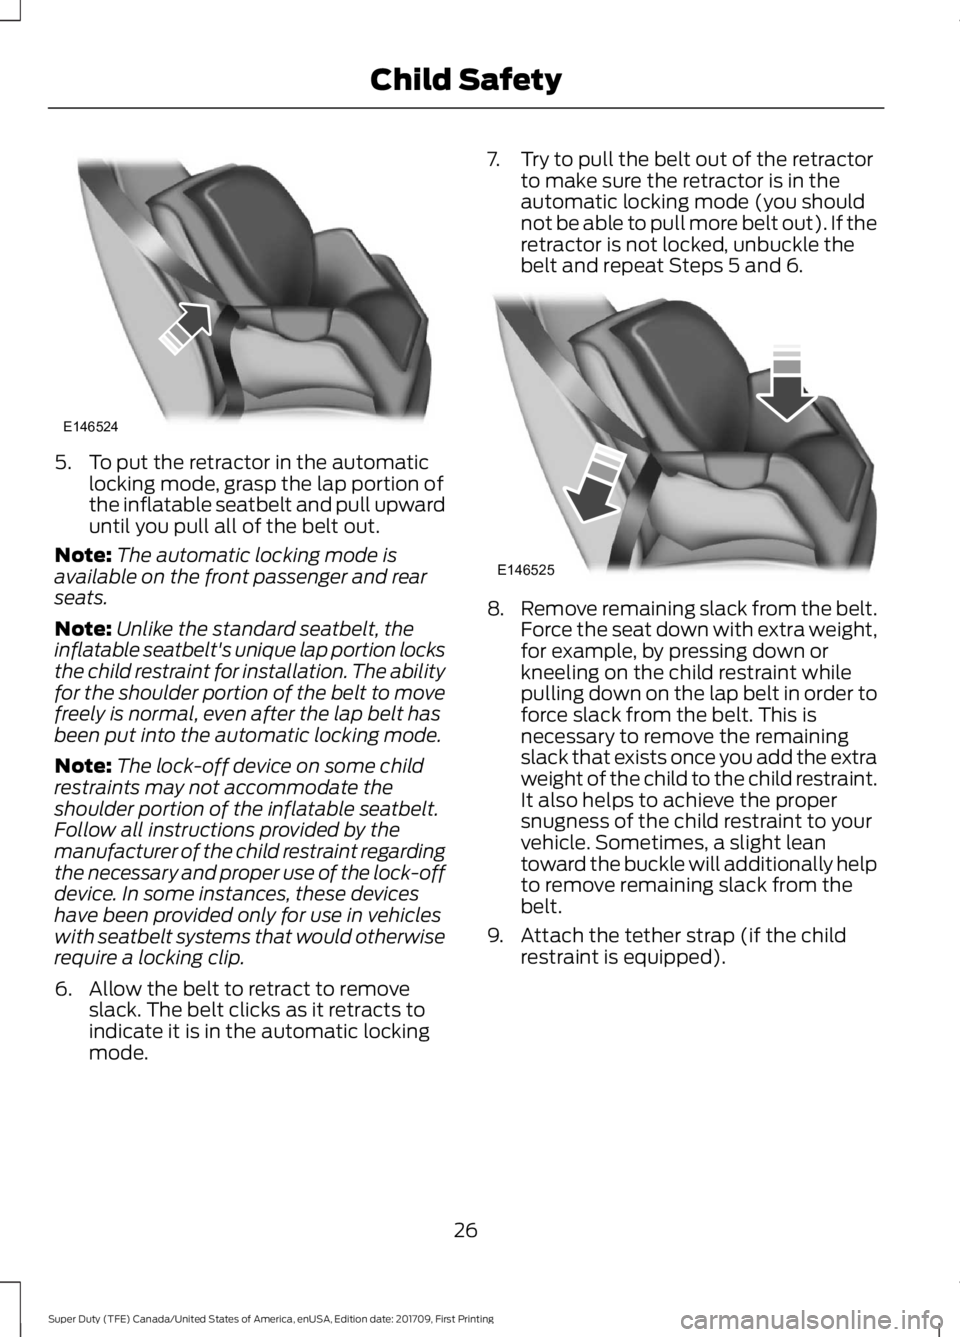 FORD F450 SUPER DUTY 2018  Owners Manual 5. To put the retractor in the automatic
locking mode, grasp the lap portion of
the inflatable seatbelt and pull upward
until you pull all of the belt out.
Note: The automatic locking mode is
availabl